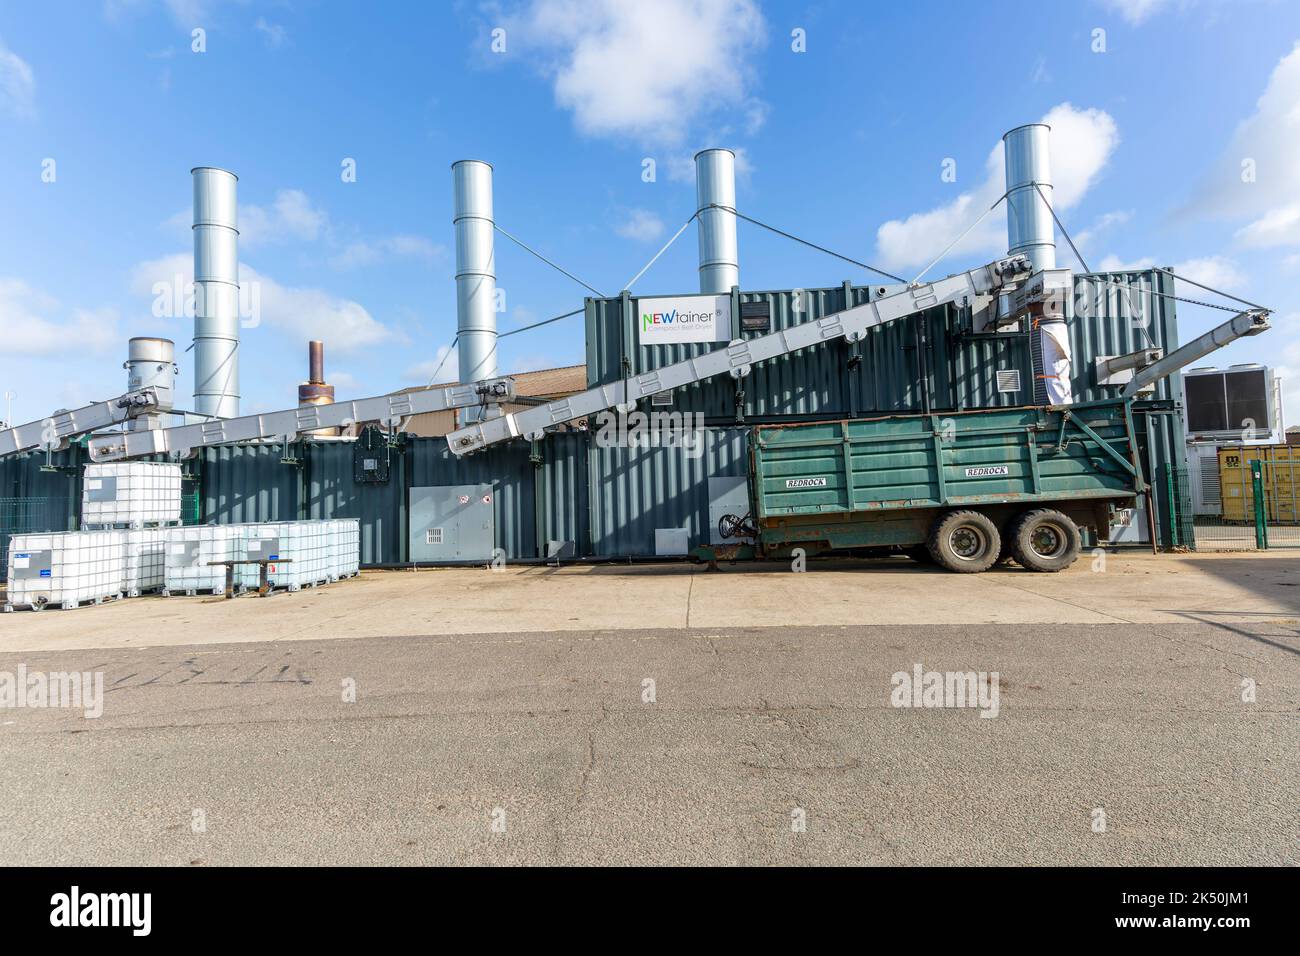 Newtainer drying machinery biogas electricity generation, AgriGen Ltd, Bentwaters Park, Suffolk, England, UK Stock Alamy